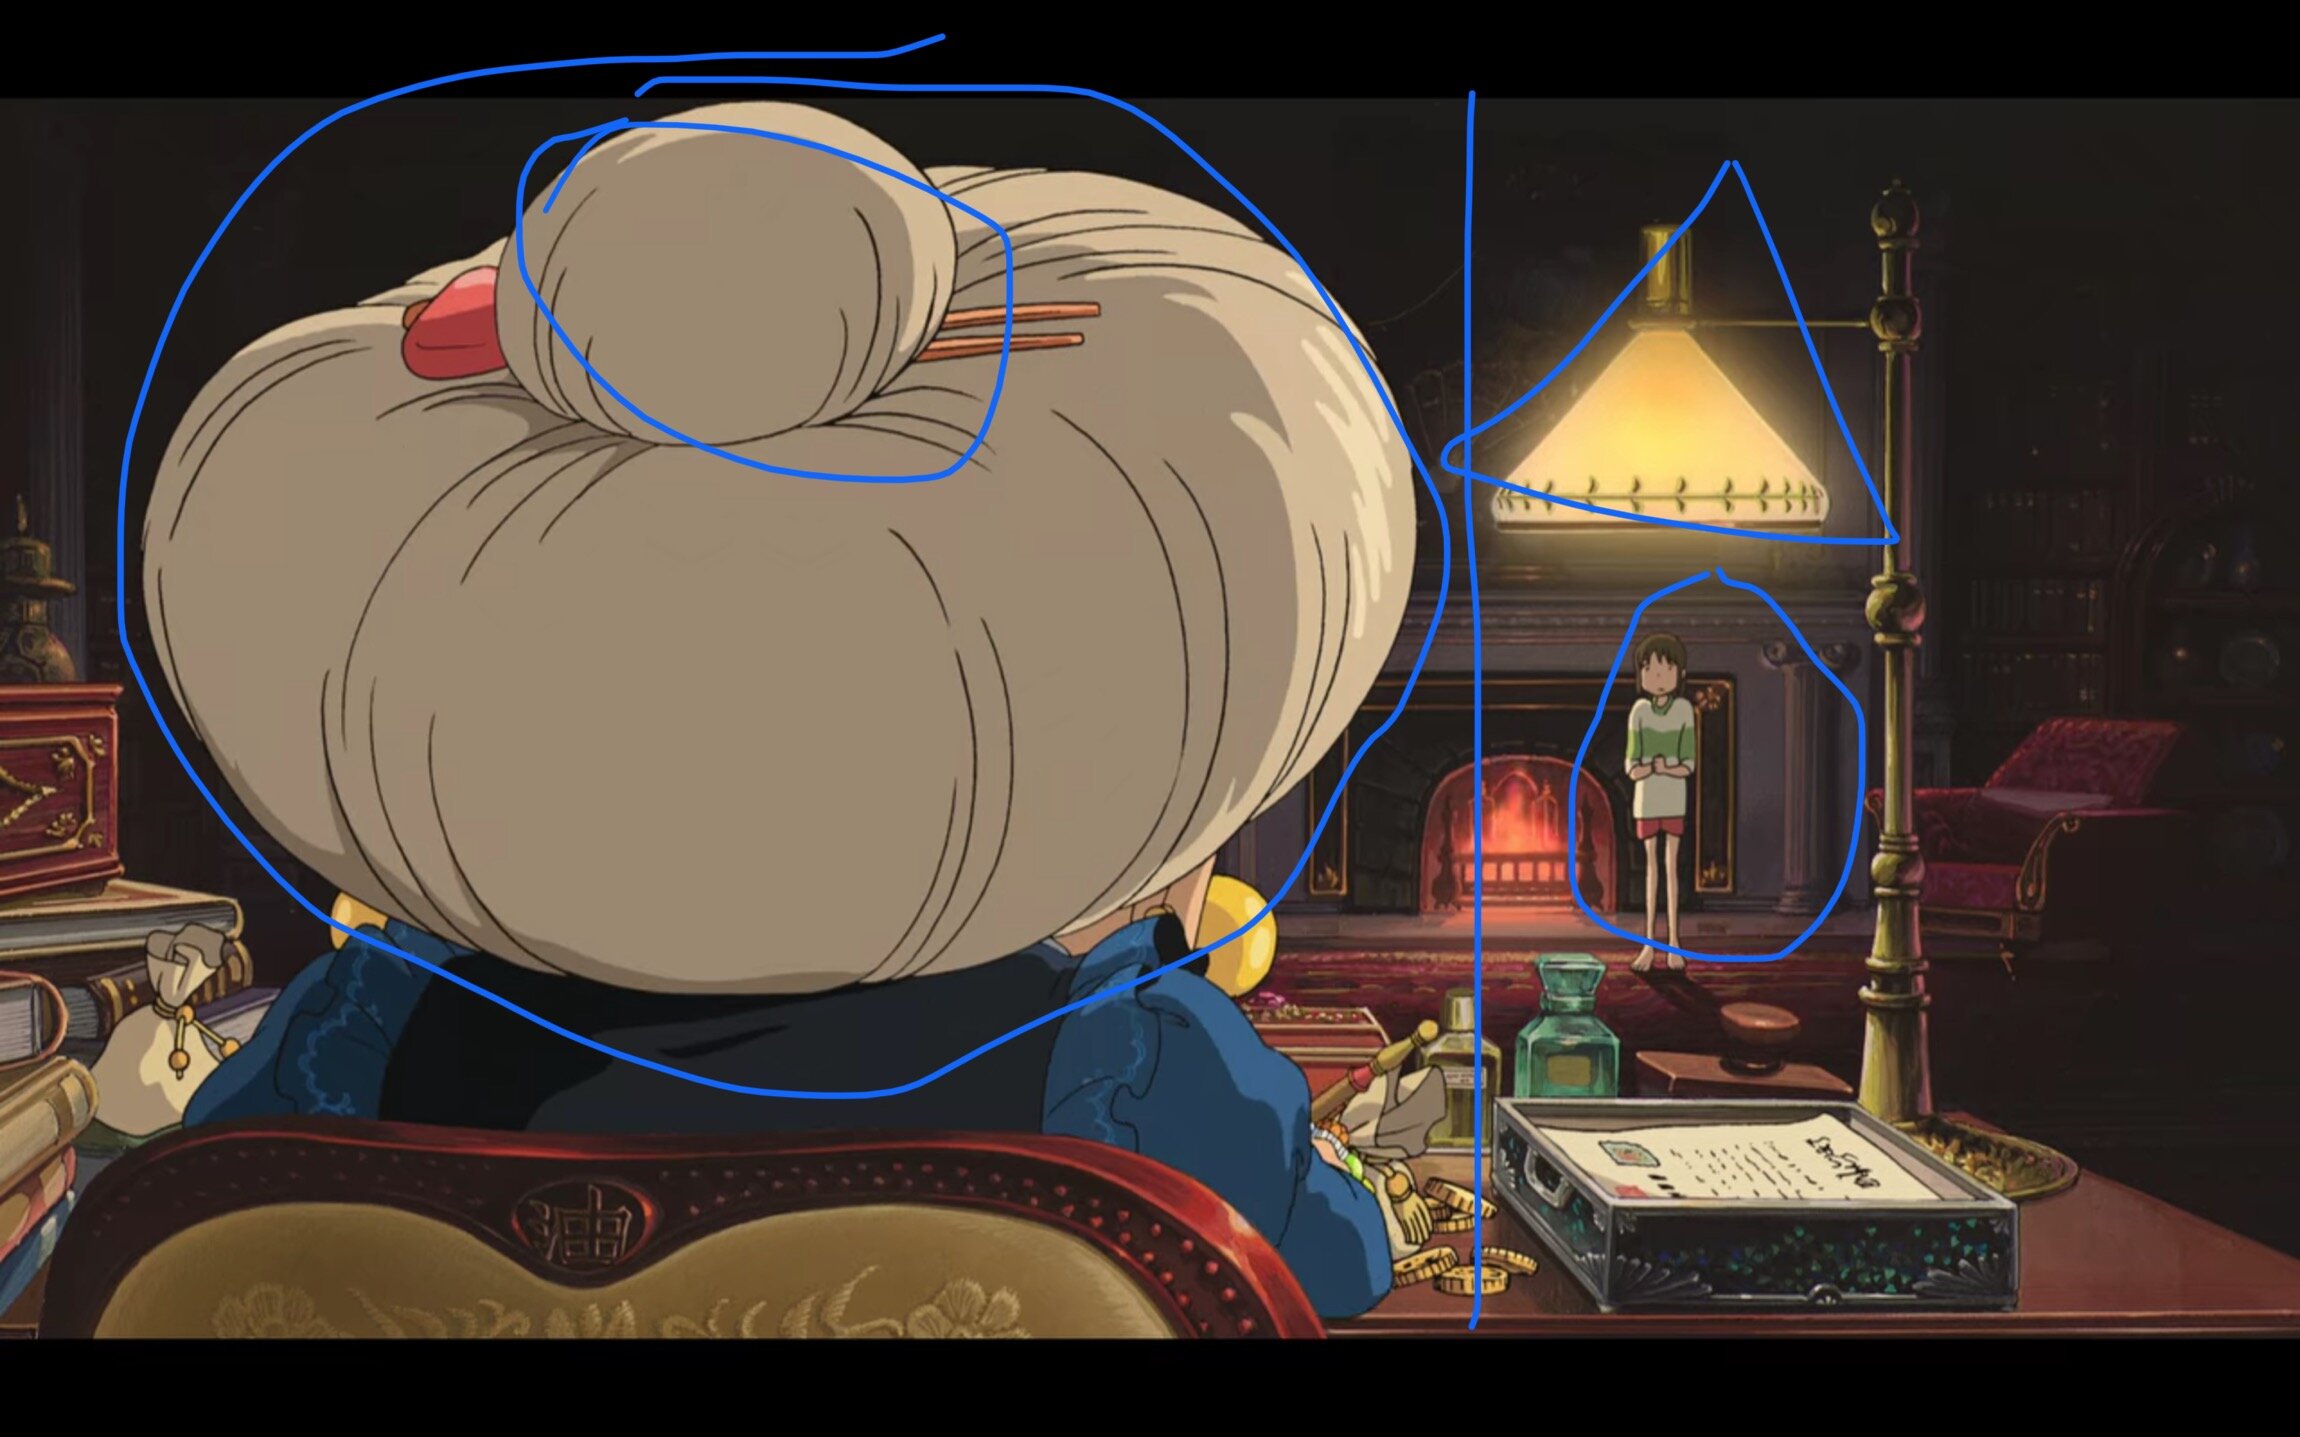  divided frame, great detail and perspective, love how the lamp frames Chihiro’s head 